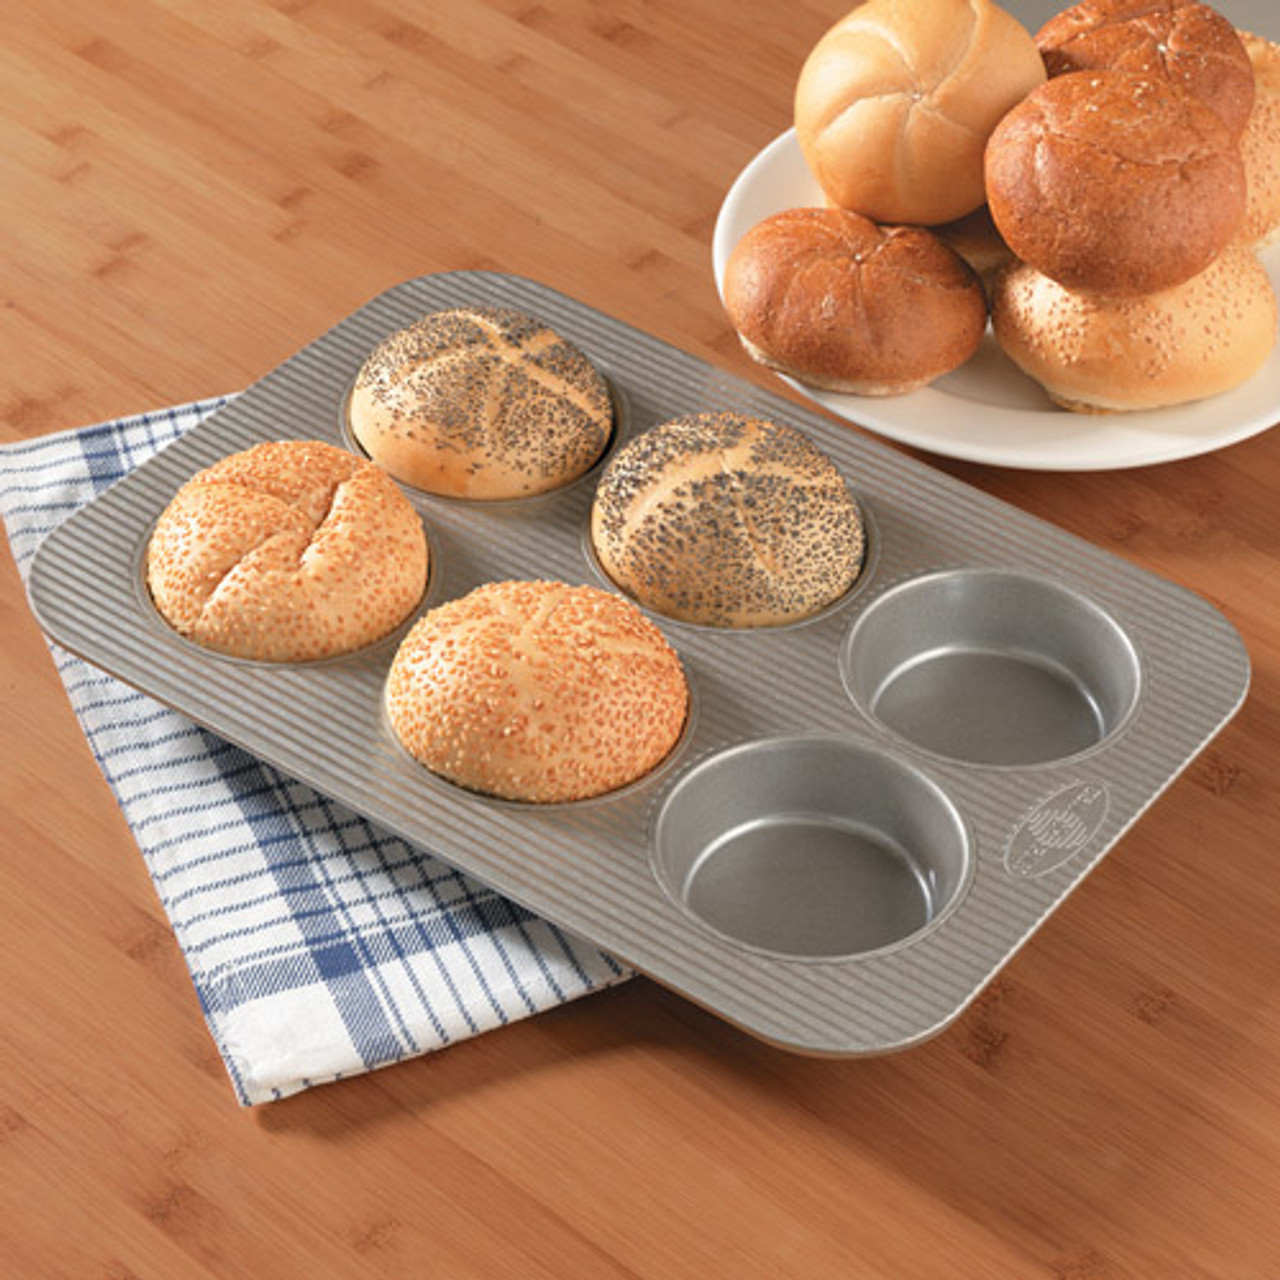 https://cdn11.bigcommerce.com/s-e0xlh4avpe/images/stencil/1280x1280/products/112061/148227/usa-pan-mini-round-cake-panel-pan-6-well-26__53091.1650942401.jpg?c=1